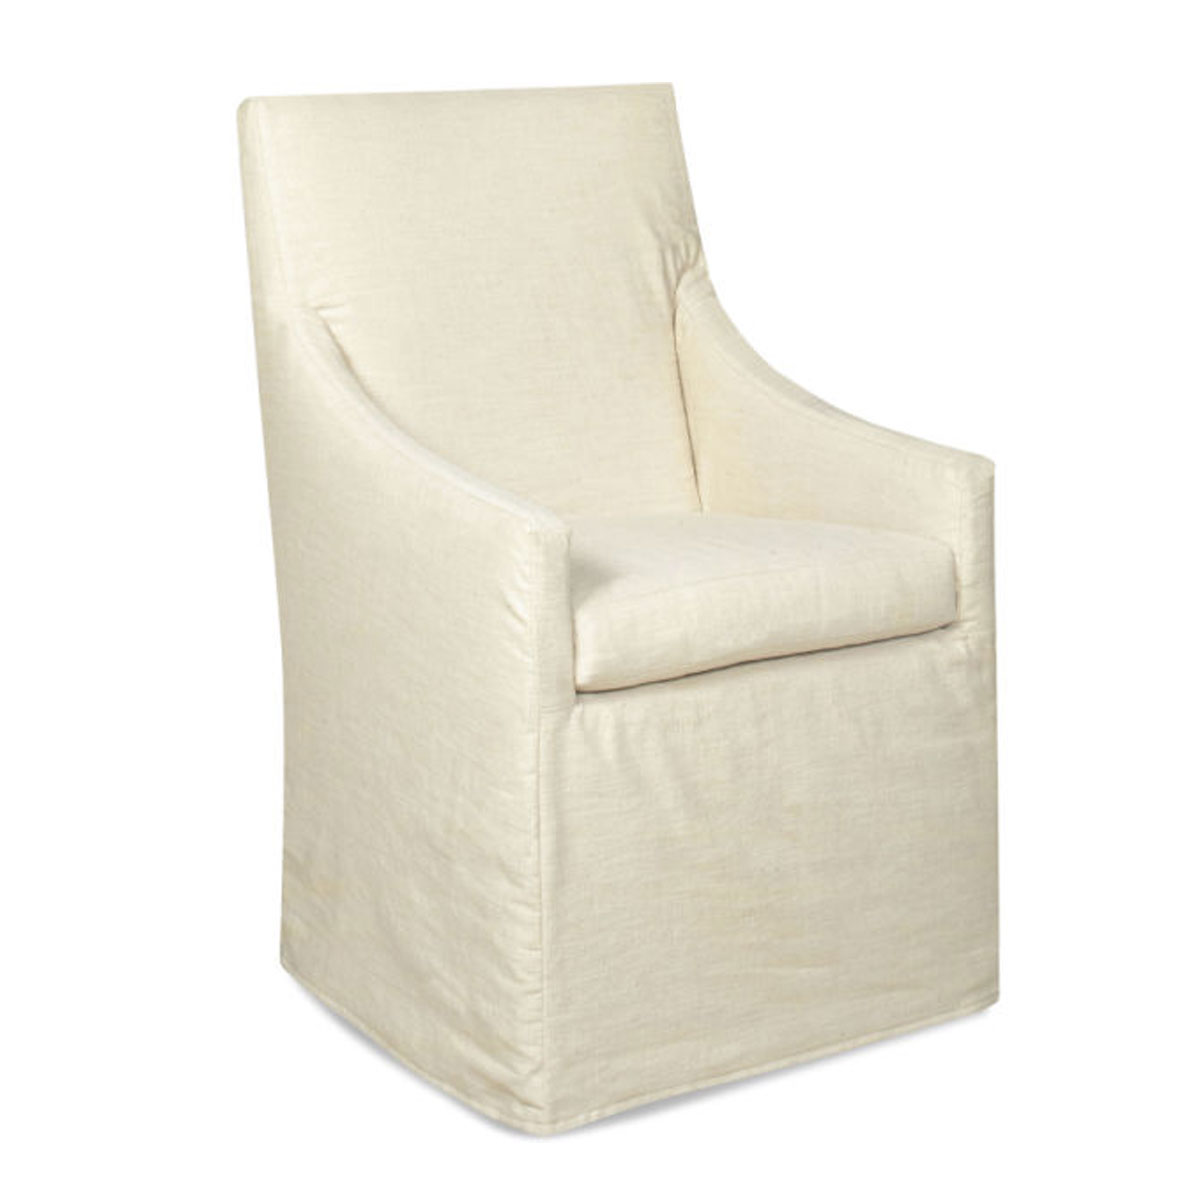 Parker Southern 2050 Liv Chair with Slipcover